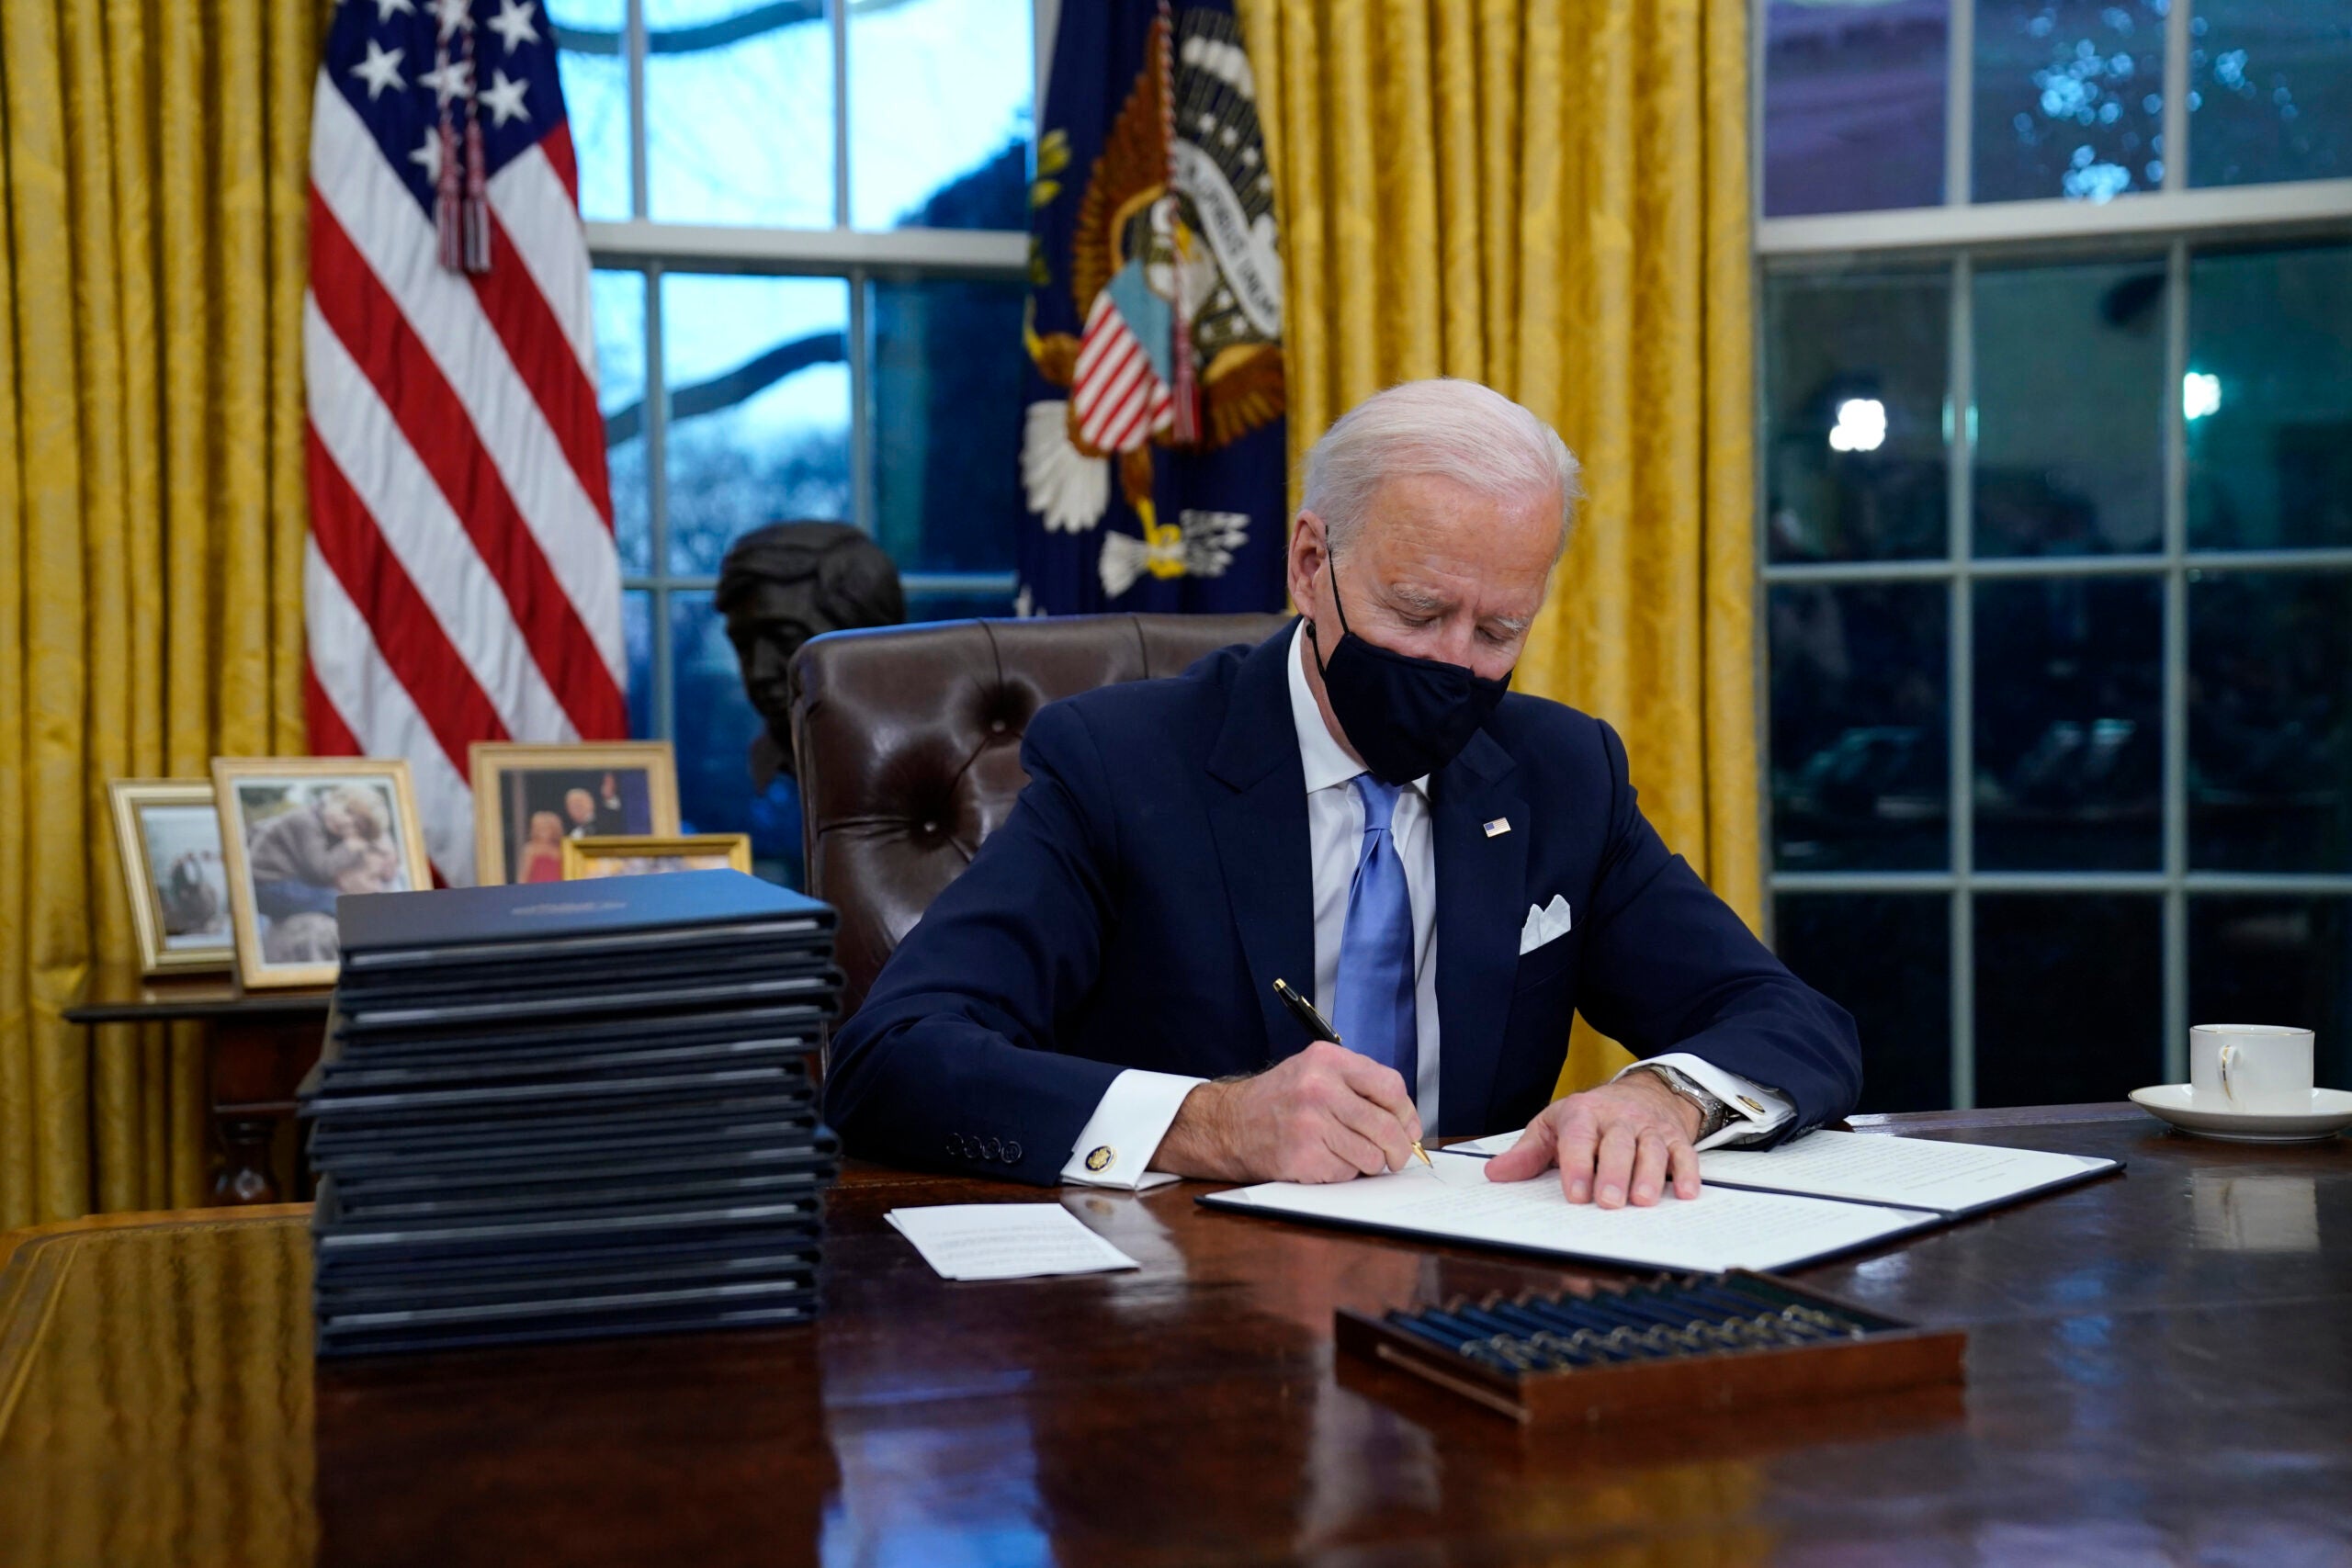 Joe Biden signs his first executive orders in the Oval Office on day one of his administration, January 20, 2021.